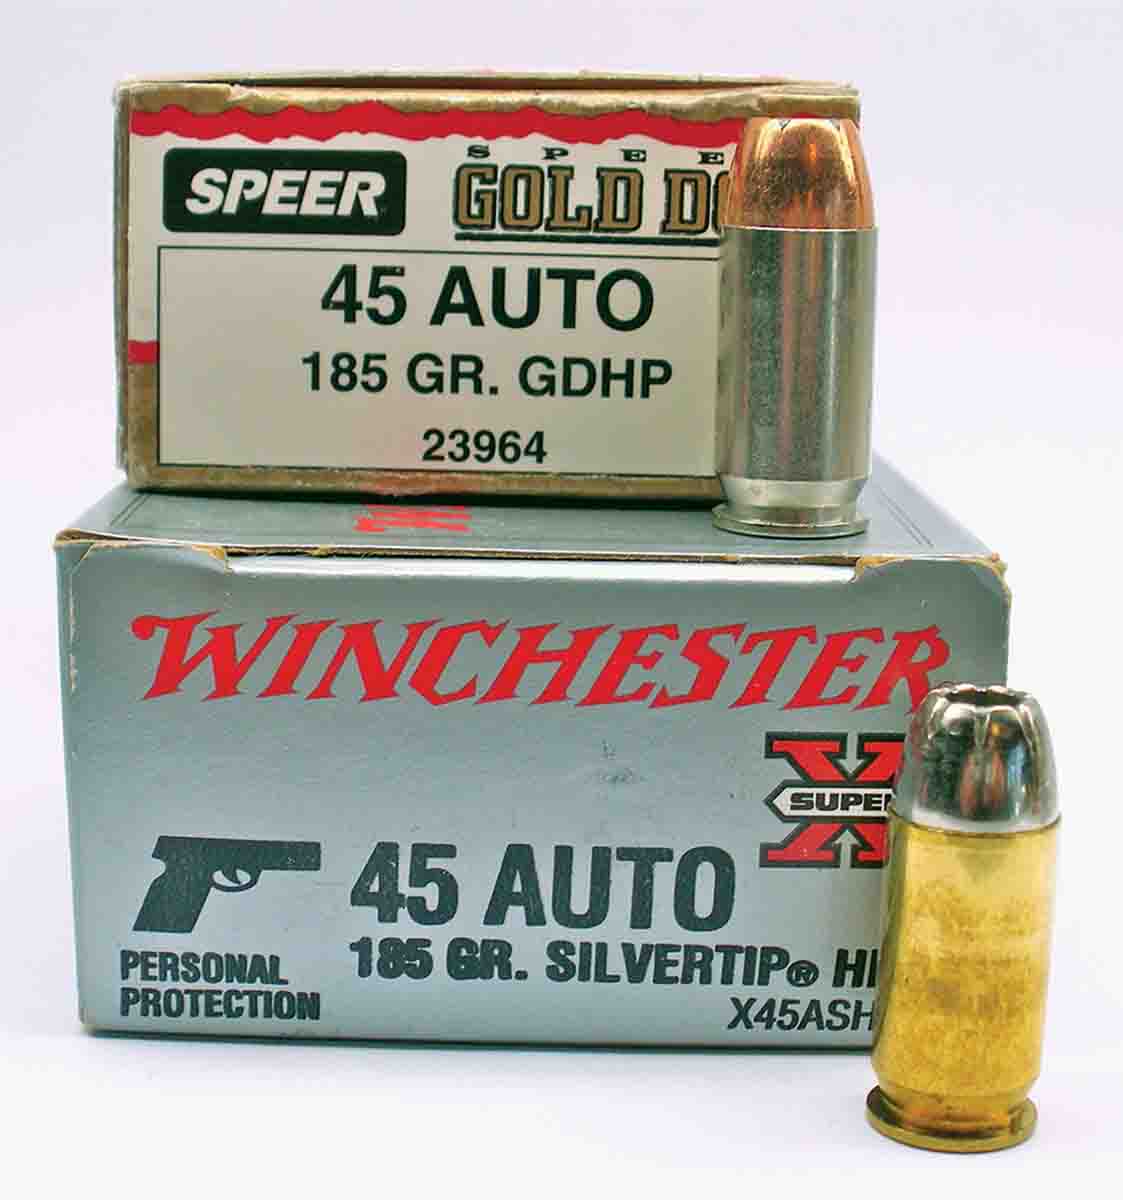 Speer Gold Dot and Winchester Silvertip 185-grain factory loads are quite similar.